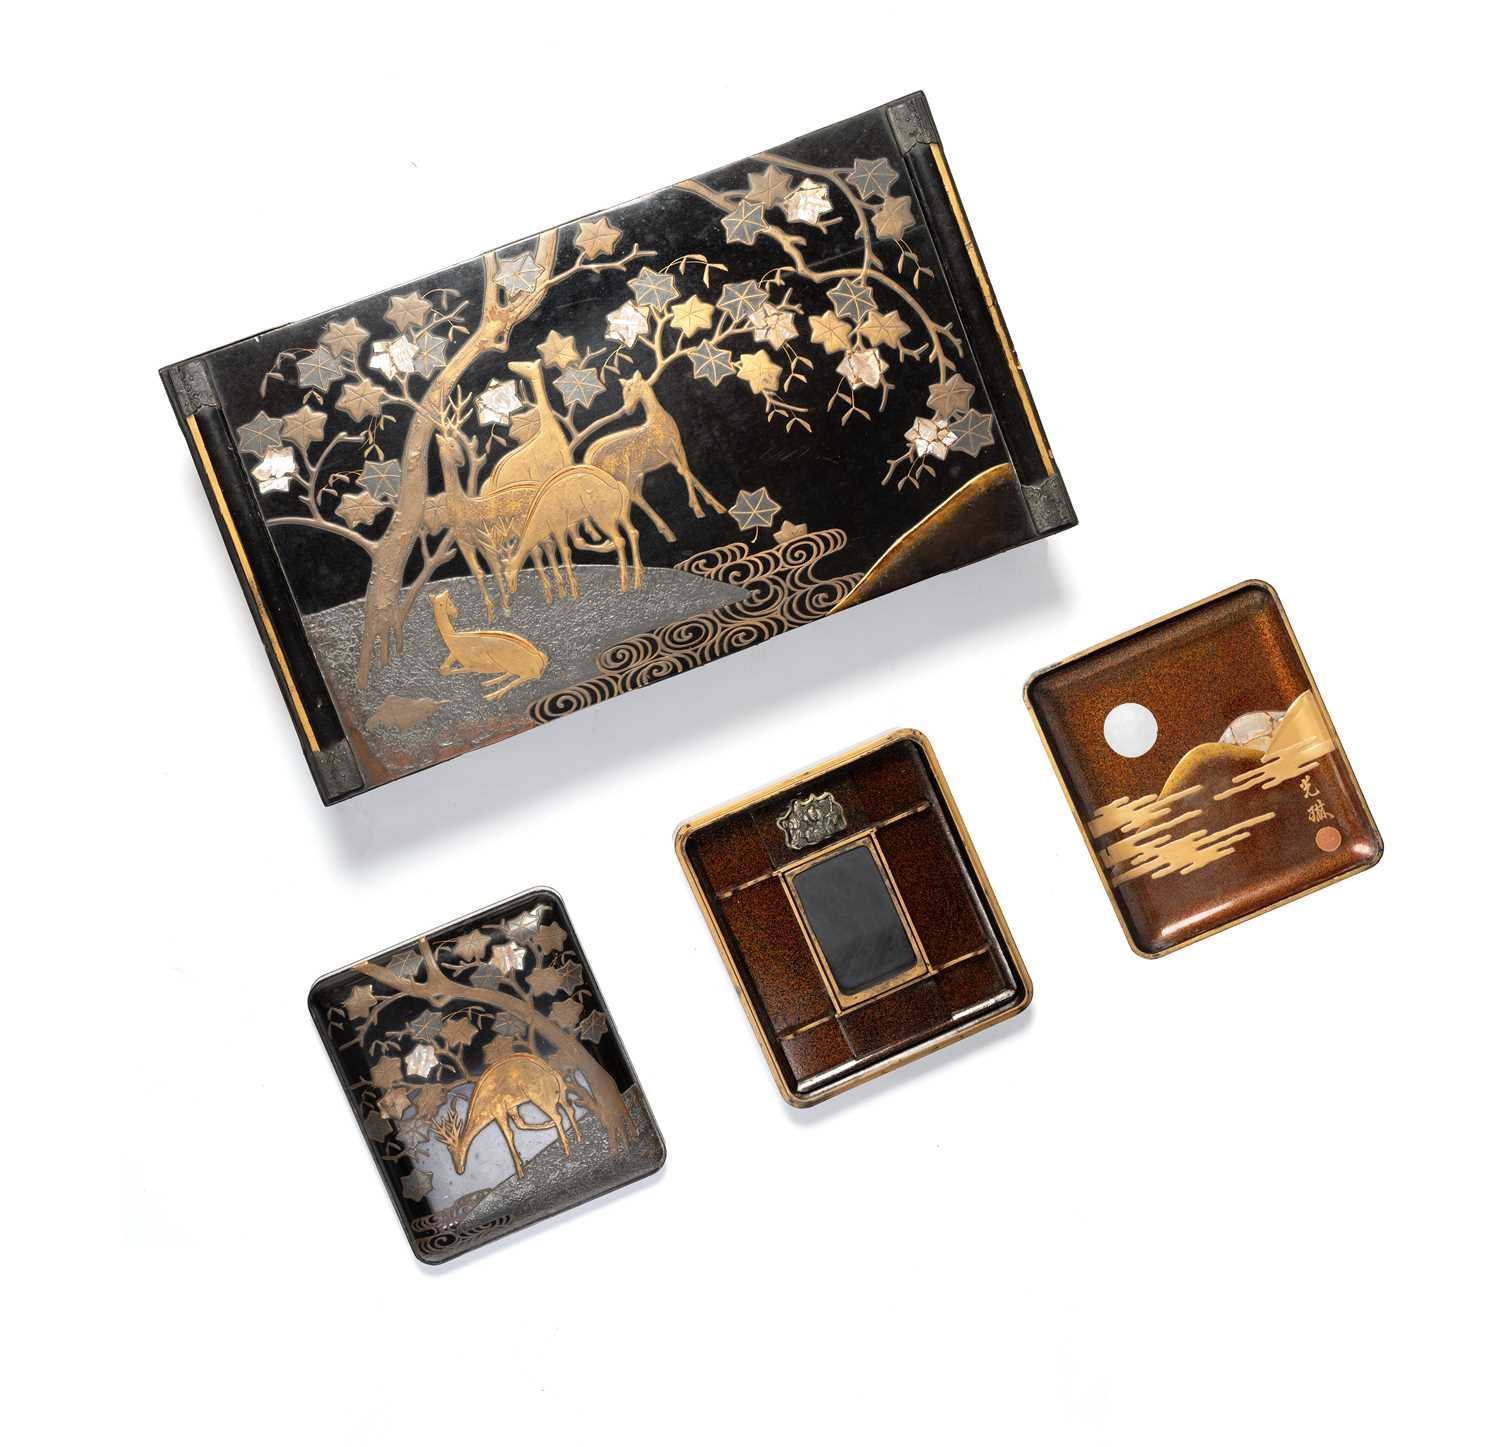 NO RESERVE A JAPANESE LACQUER BUNDAI (WRITING TABLE) AND MATCHING SUZURIBAKO (WRITING BOX) AFTER - Image 2 of 6